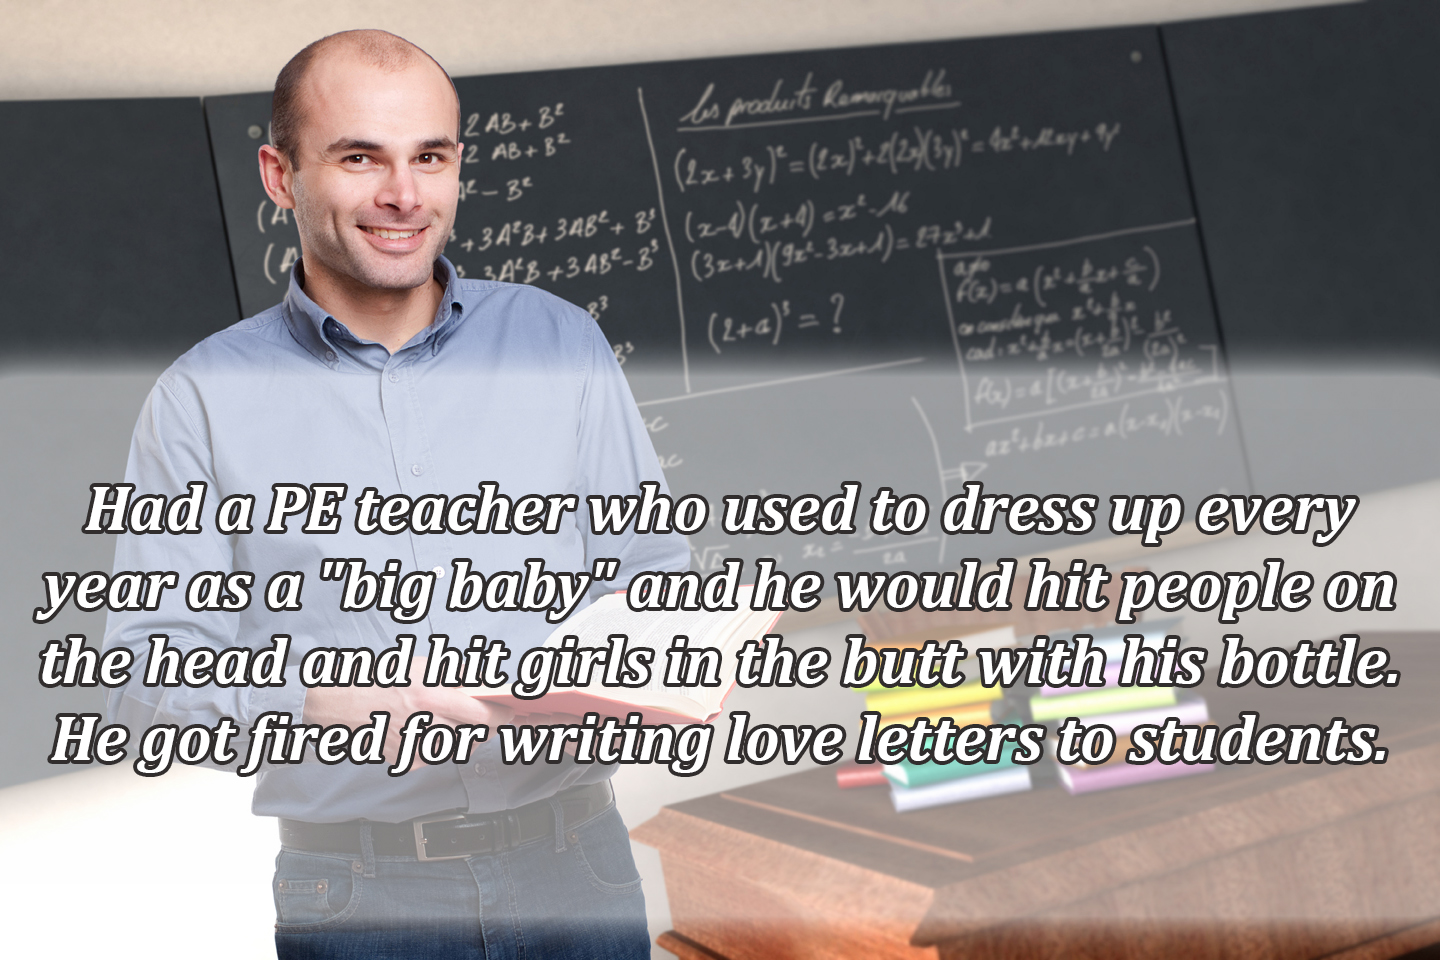 People Describe The Most Abhorrent Things Teachers Did or Said